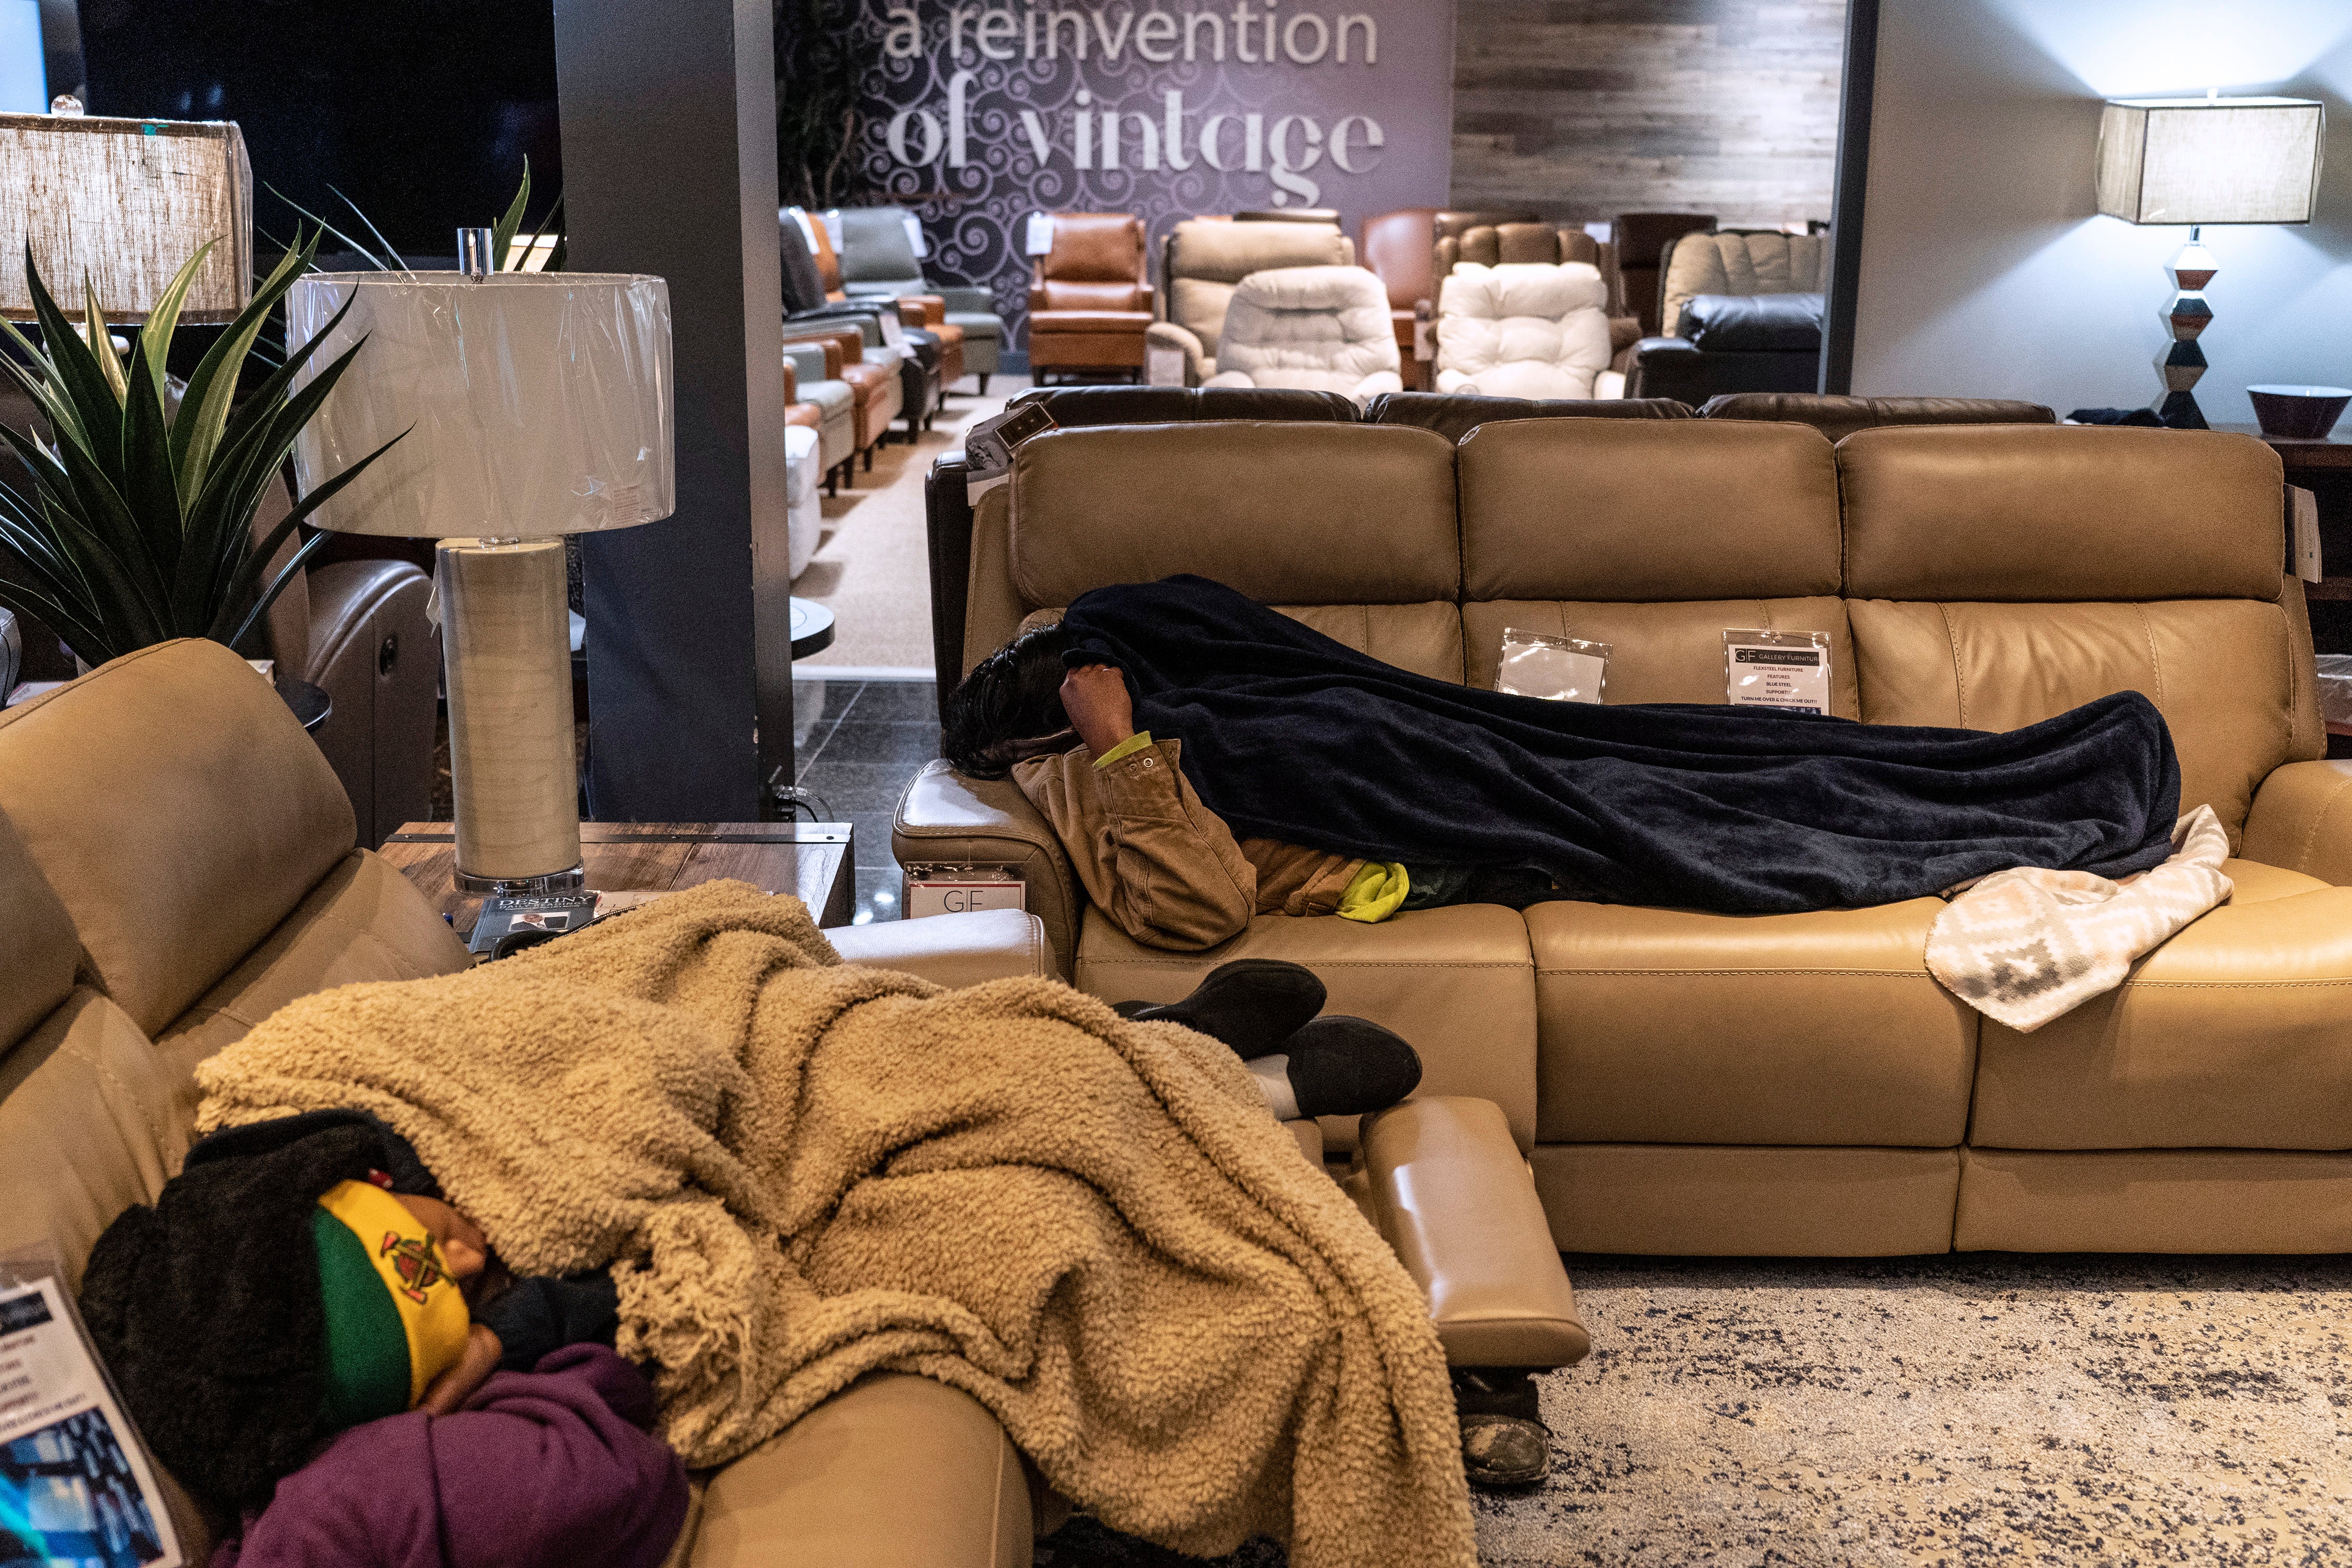 People sleep on couches while taking shelter at Gallery Furniture store which opened its door and transformed into a warming station after winter weather caused electricity blackouts on 18 February 2021 in Houston, Texas